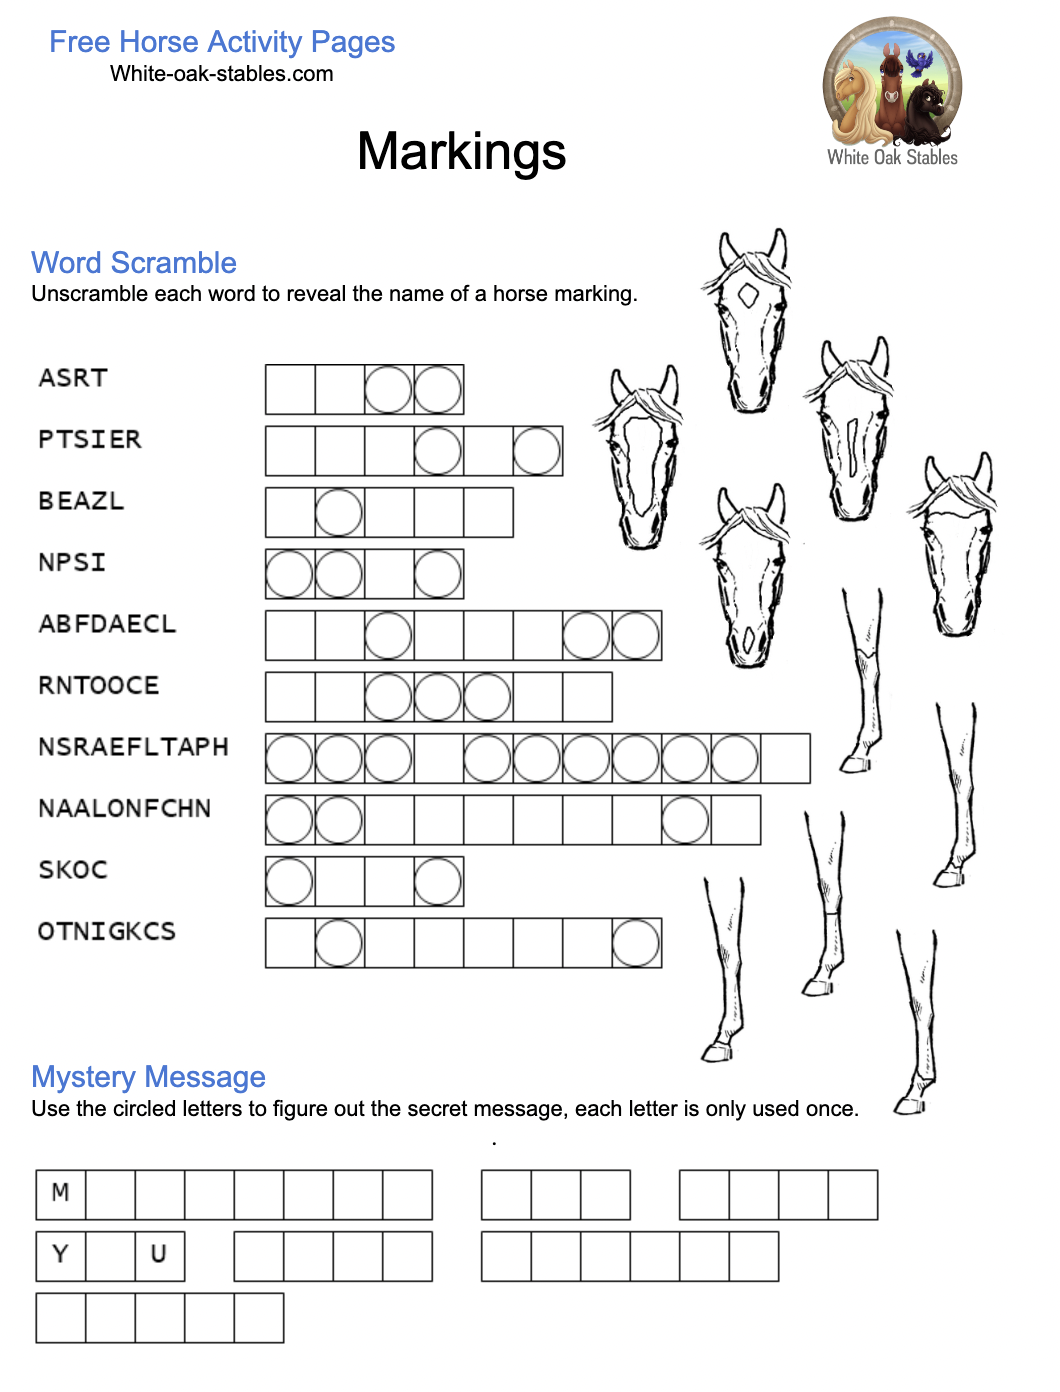 Horse Marking Puzzles